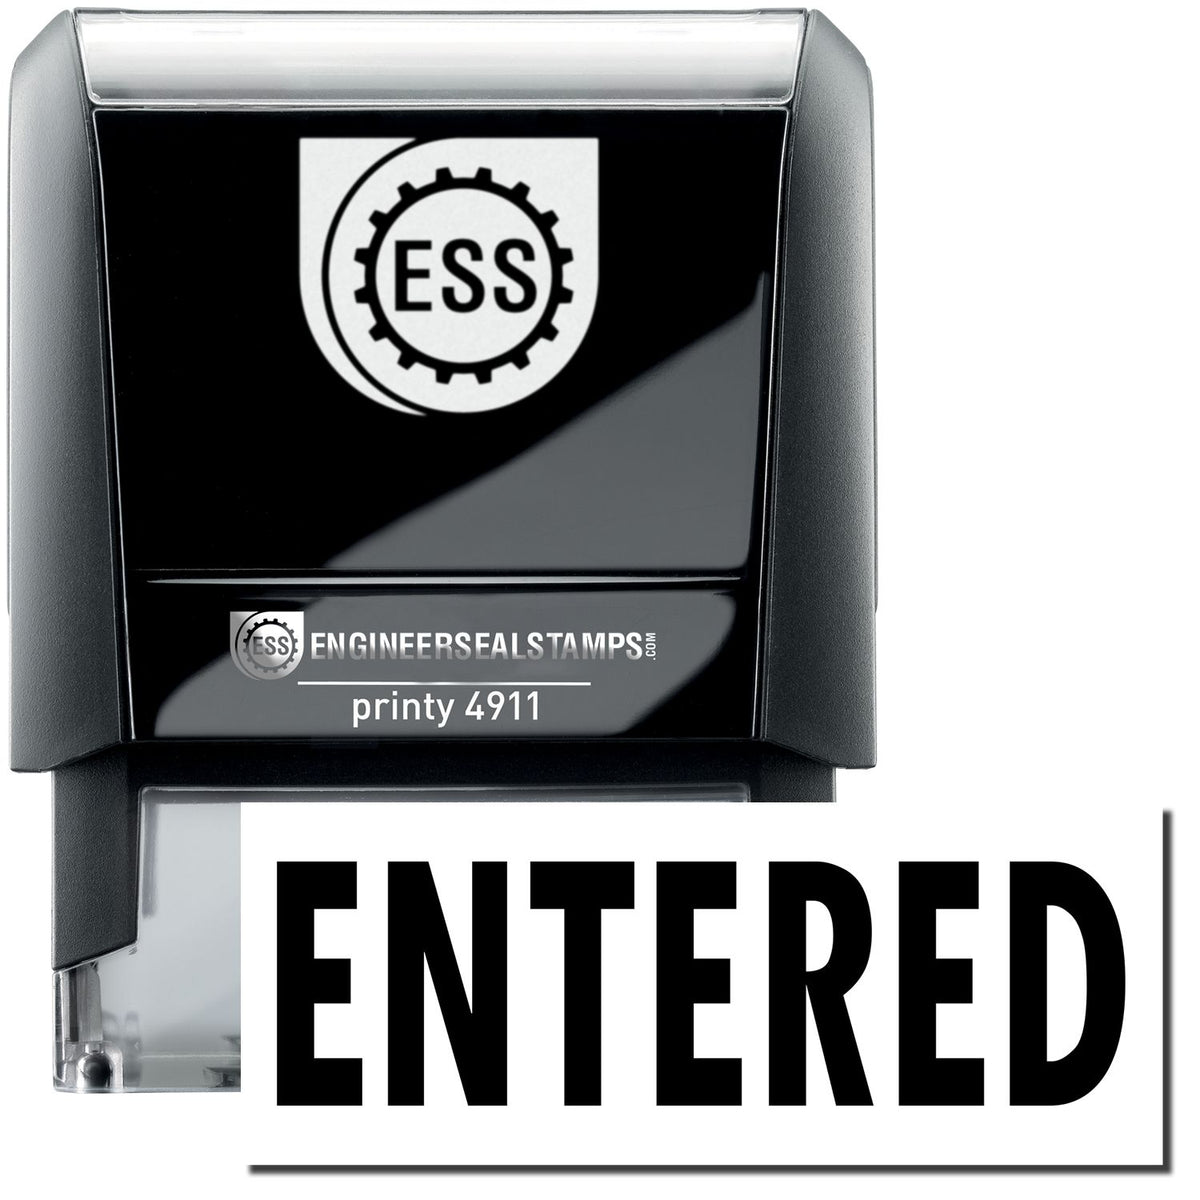 A self-inking stamp with a stamped image showing how the text &quot;ENTERED&quot; is displayed after stamping.